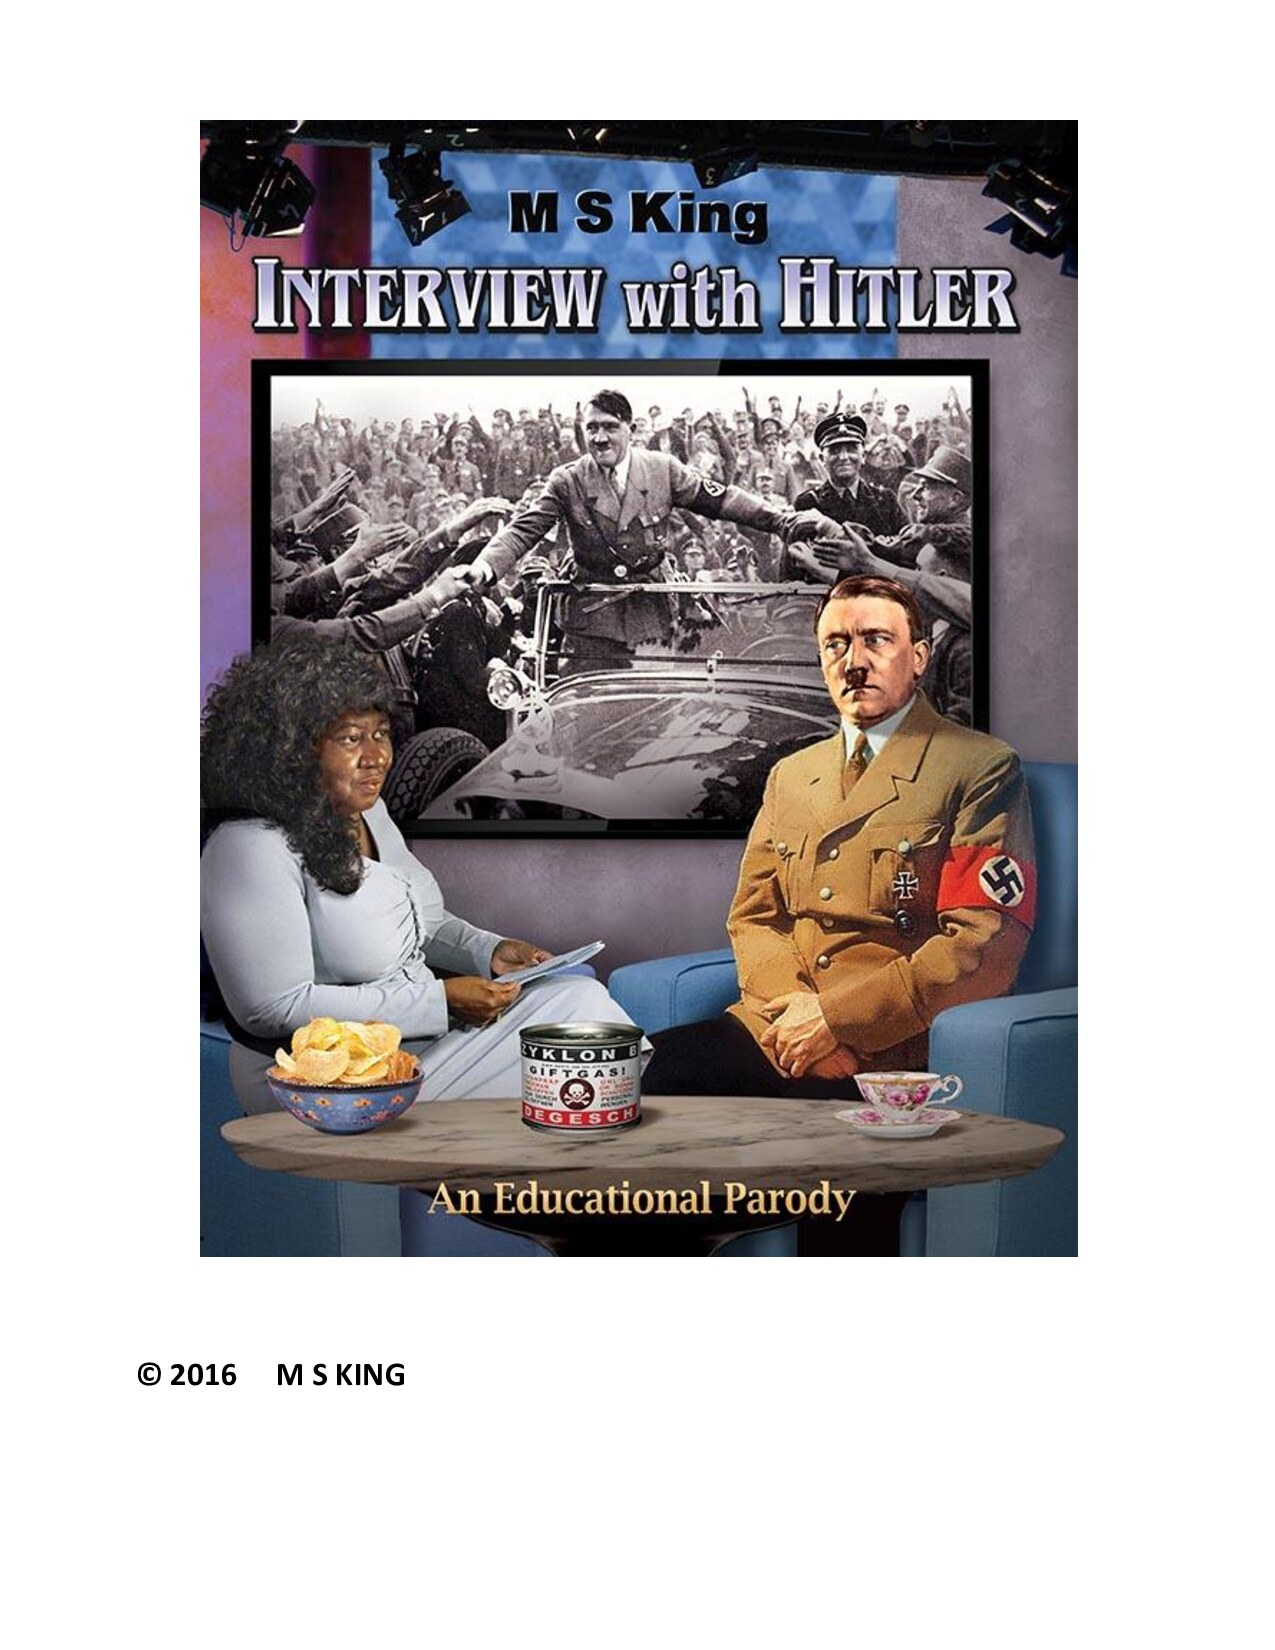 King, Mike S.; Interview with Hitler - An Educational Parody